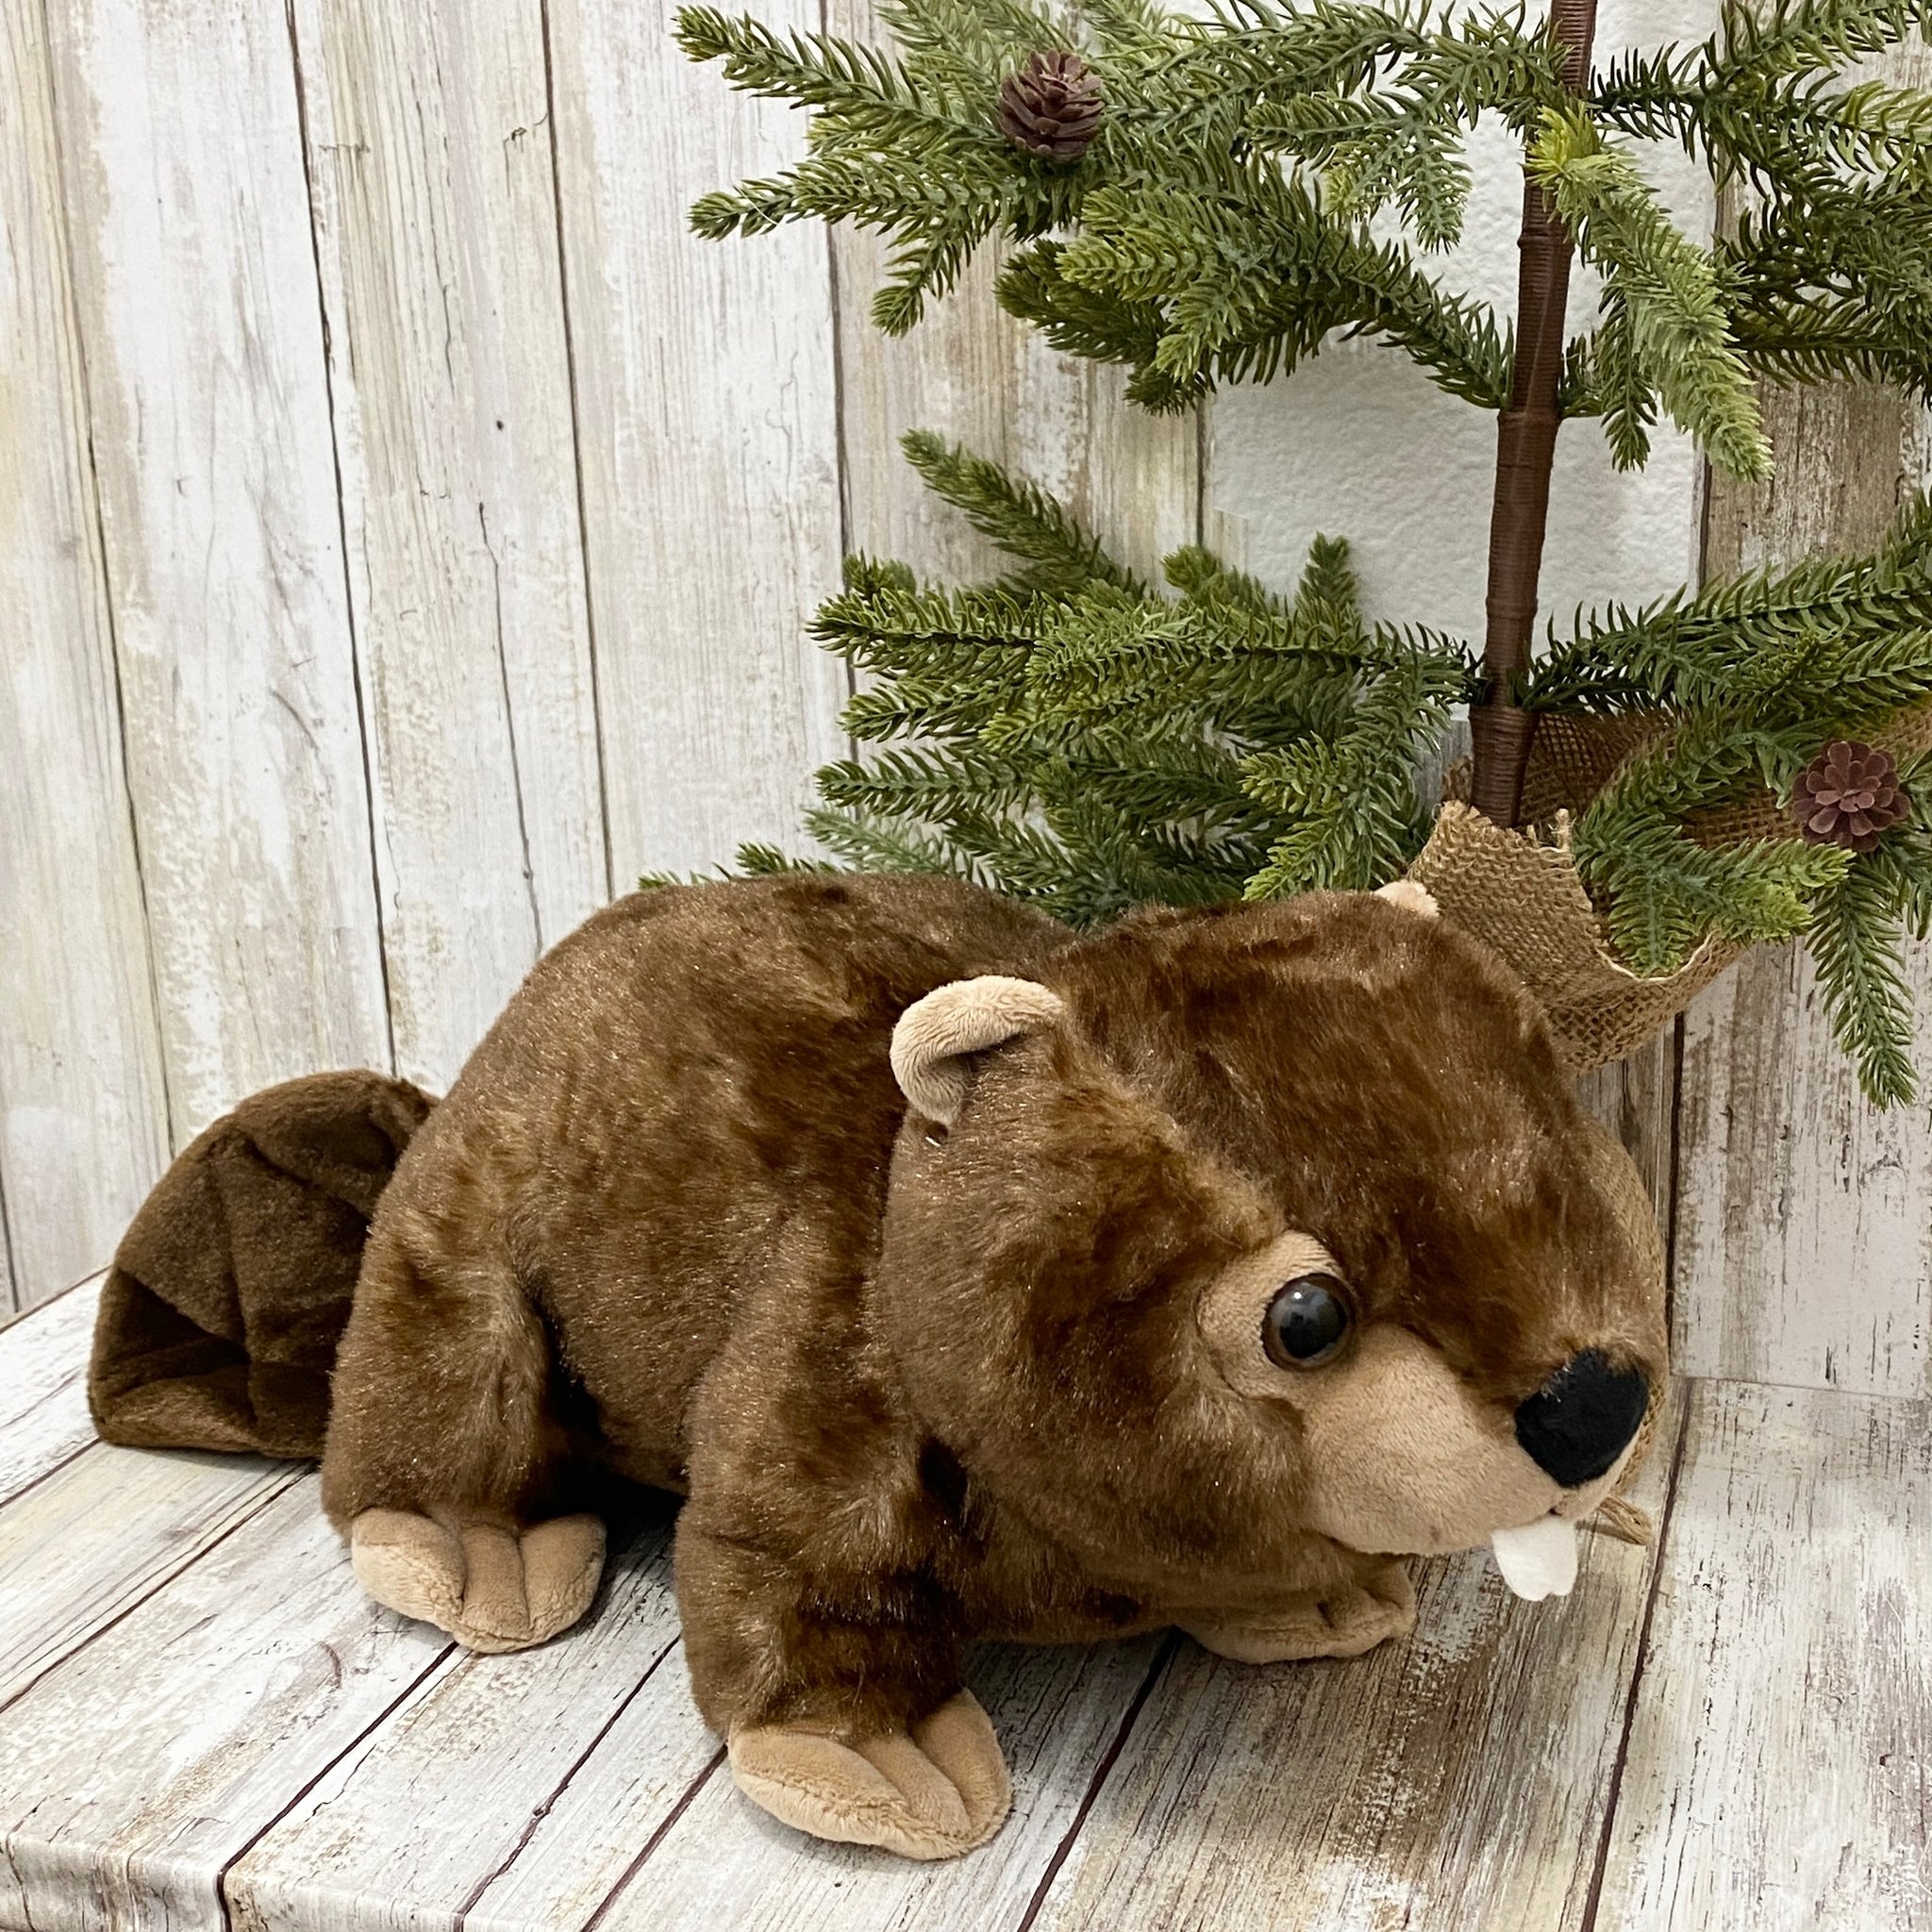 Wild Onez Beaver - 12 inch Plushy Stuffed Animal - Recycled Materials - The Petting Zoo